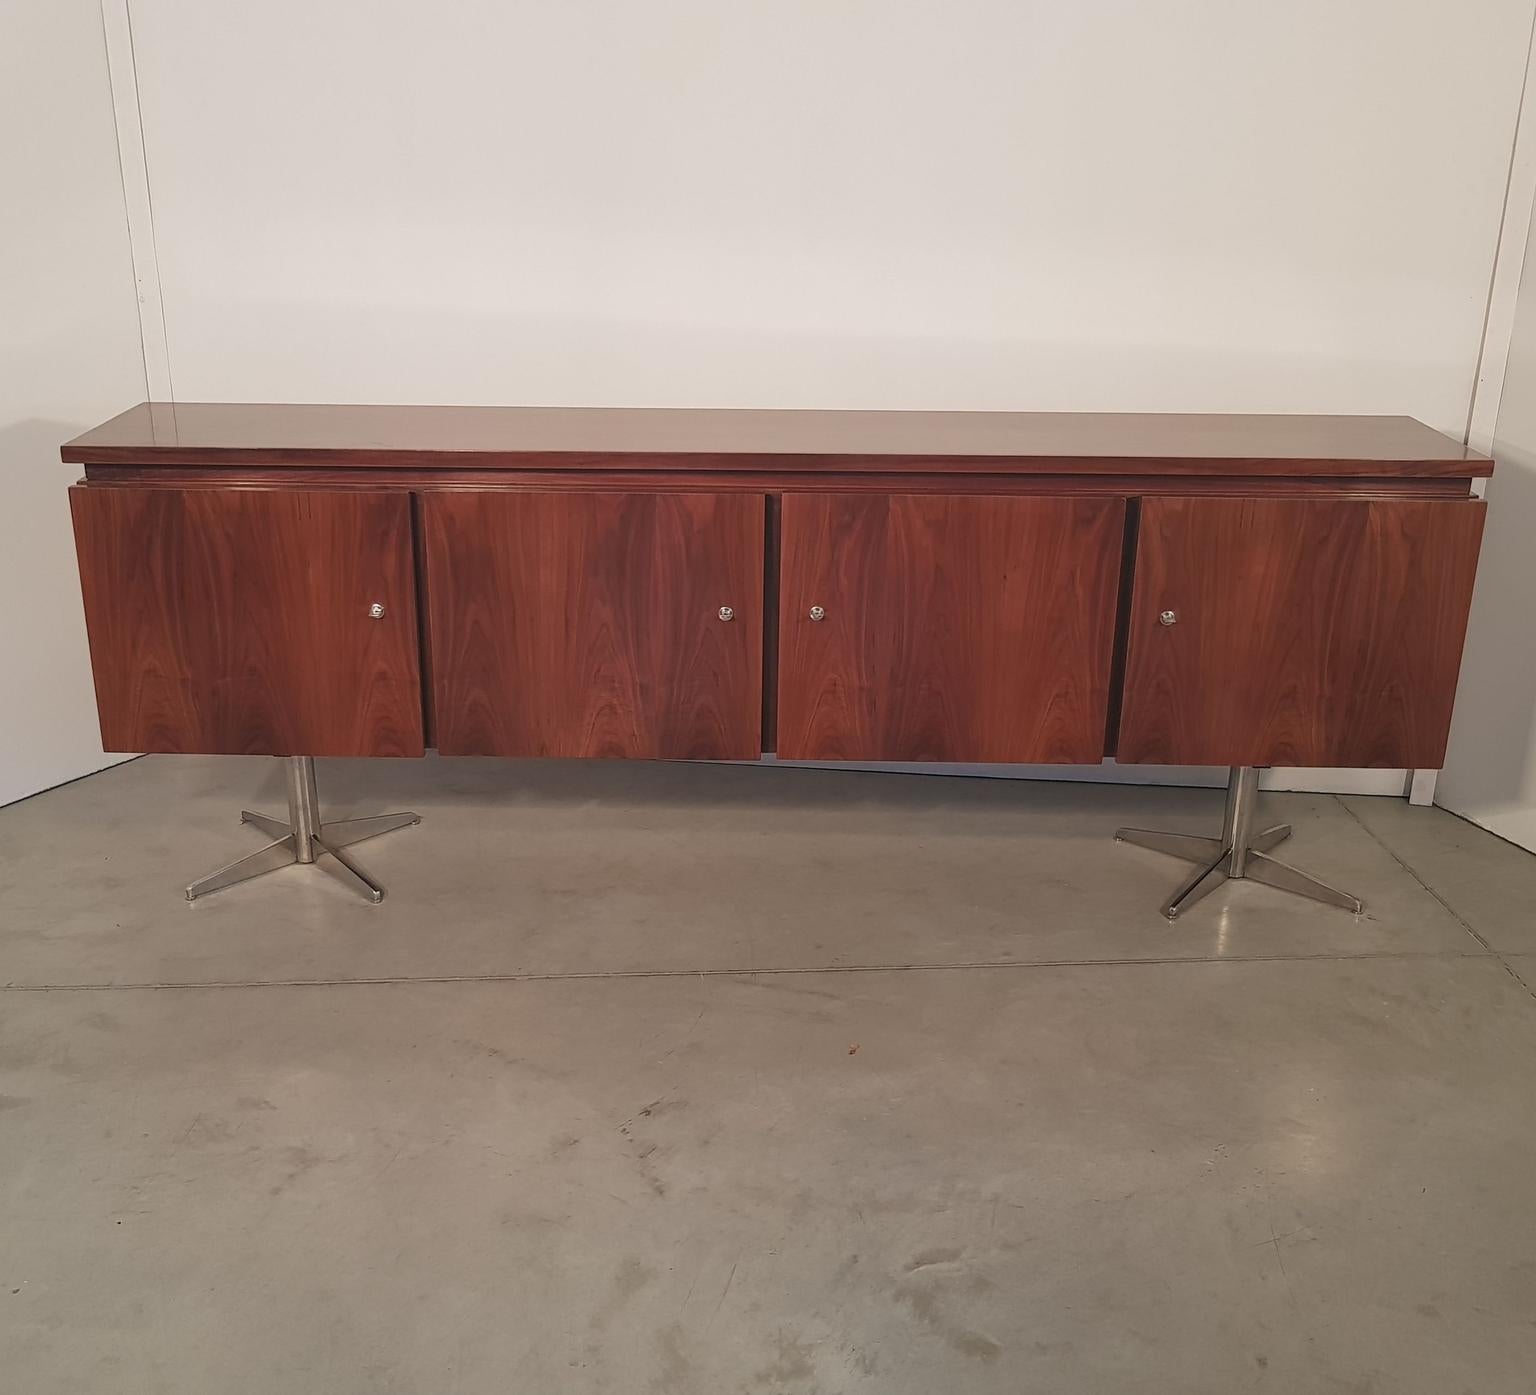 Silky polished walnut sideboard on incredible chrome legs. Inside mahogany veneer, shelves and five drawers. France, 1970s.